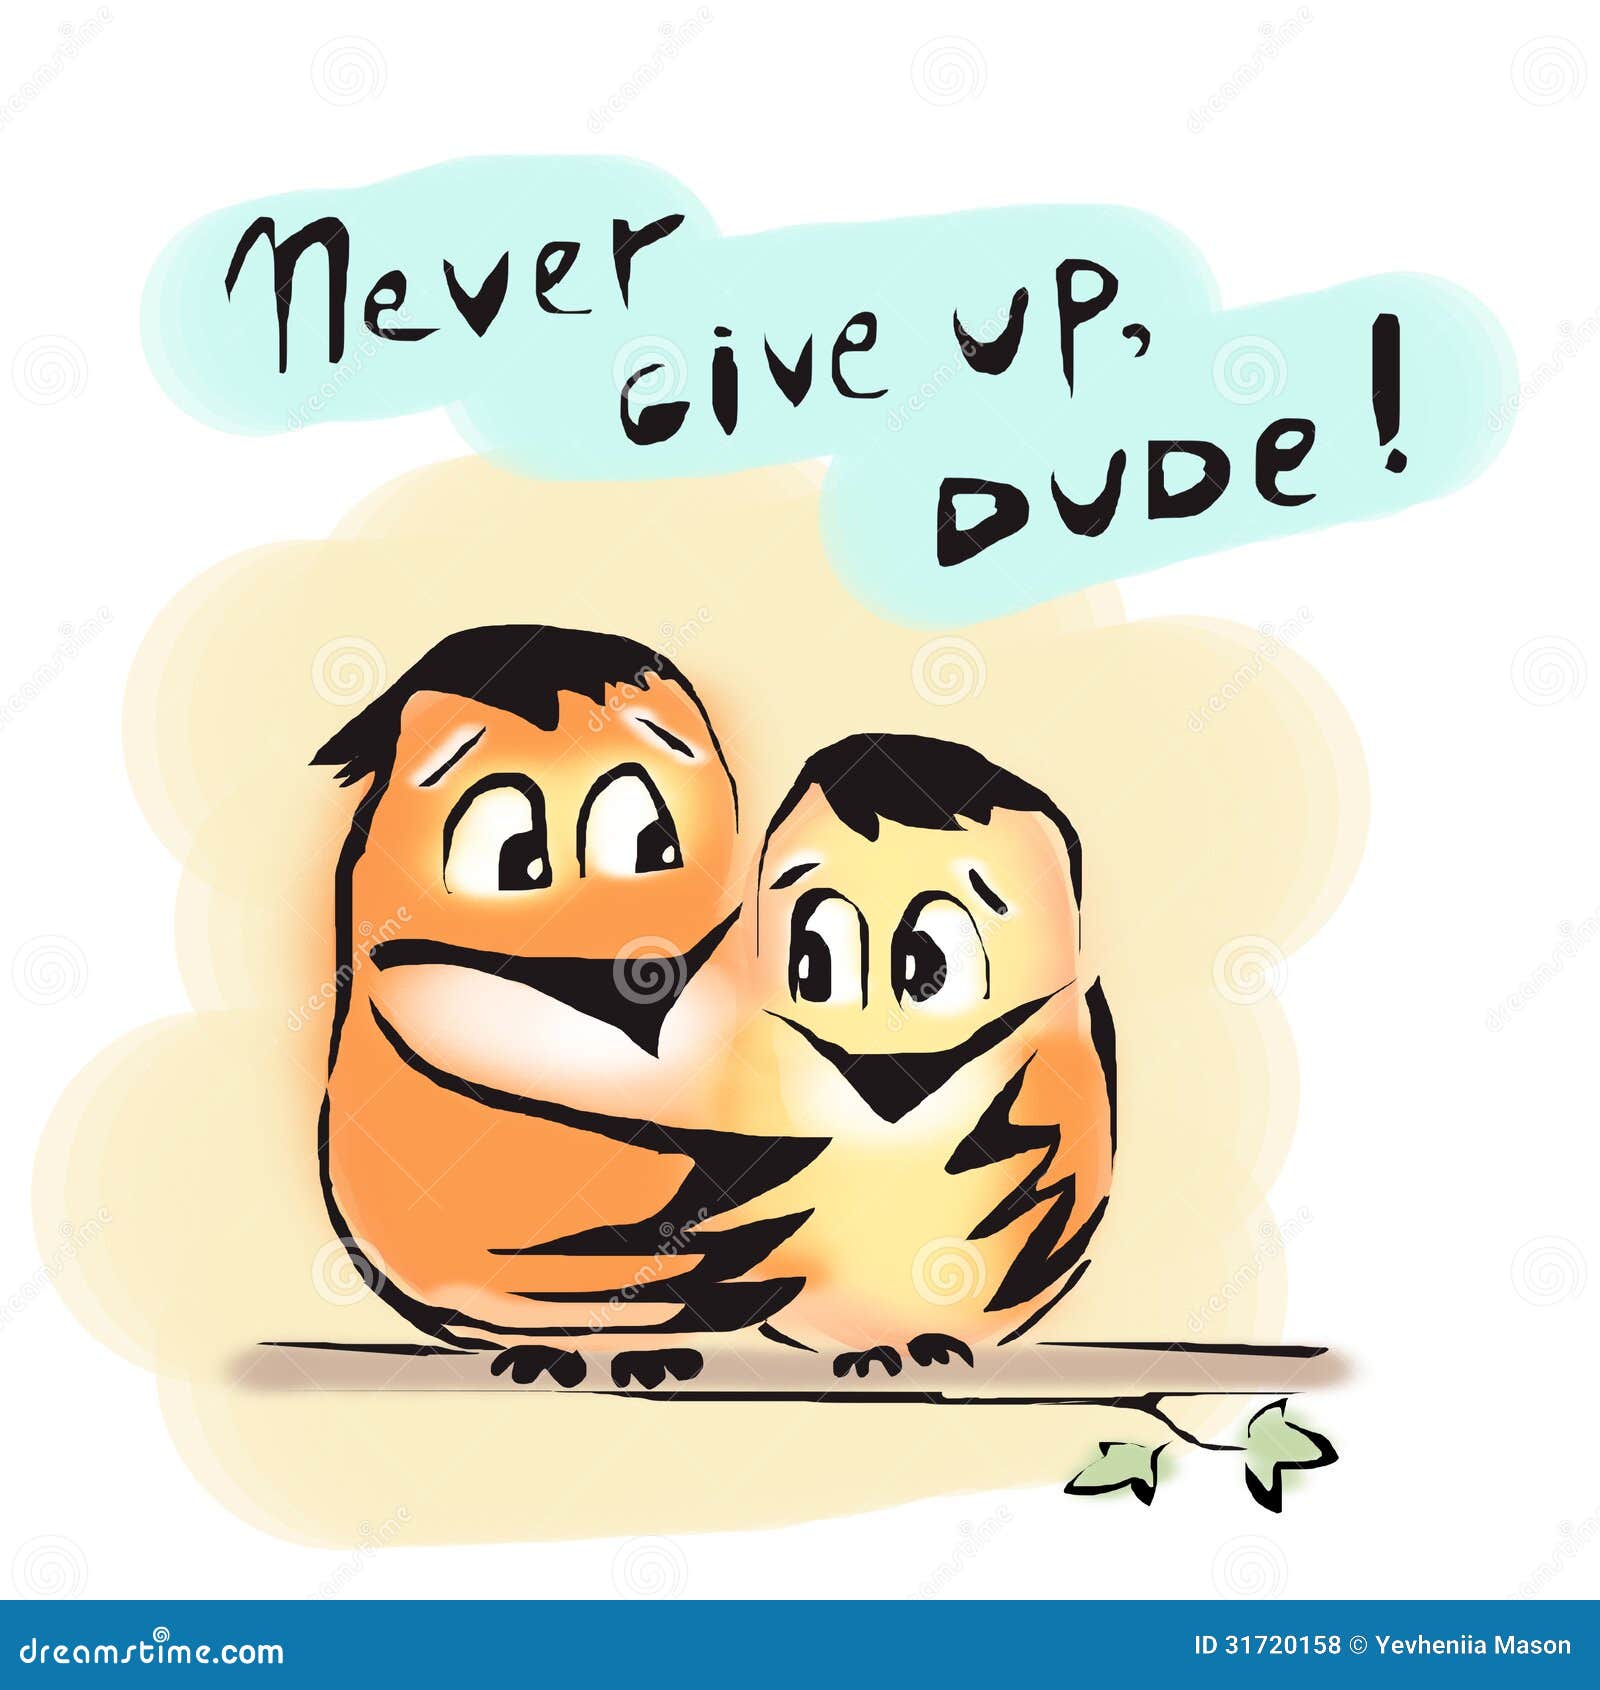 never give up birds friends dude encourage